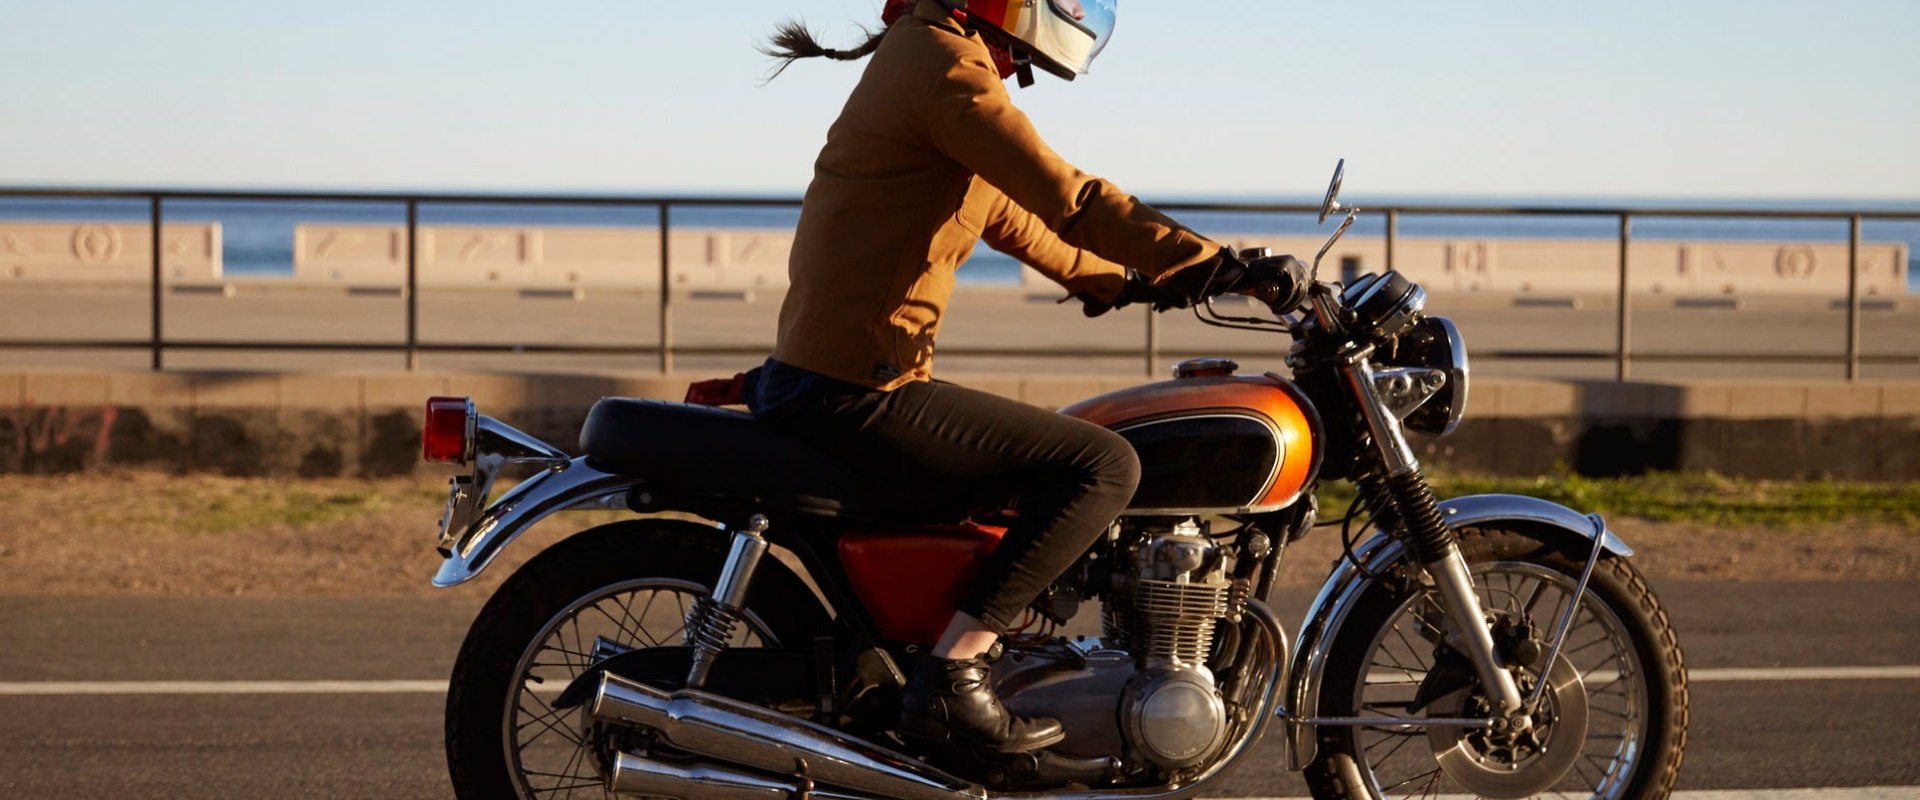 Auto Cycle Insurance for Men Under 25